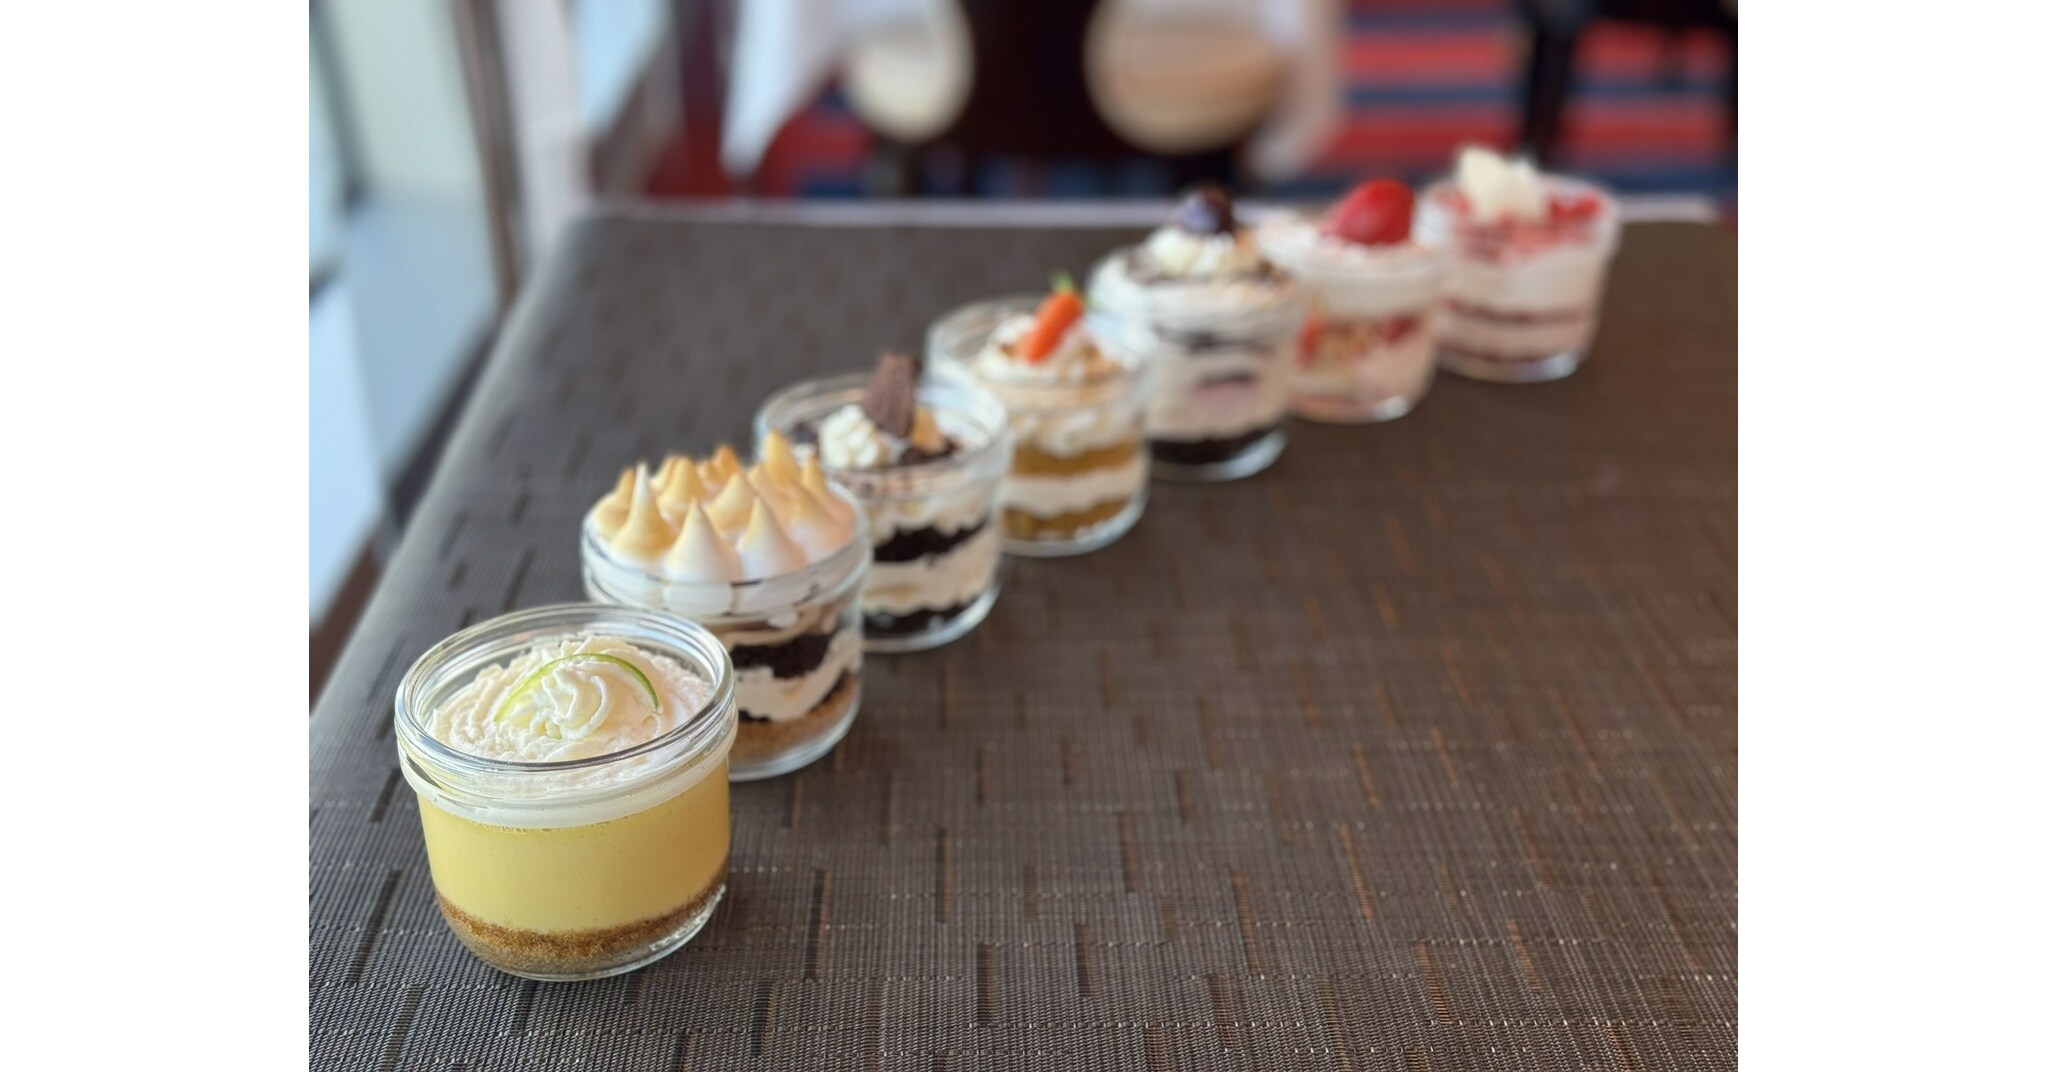 ‘Cake Me Away’ Presents Pastry Team Favorites in New Dessert Extravaganza for Guests on Holland America Line Cruises